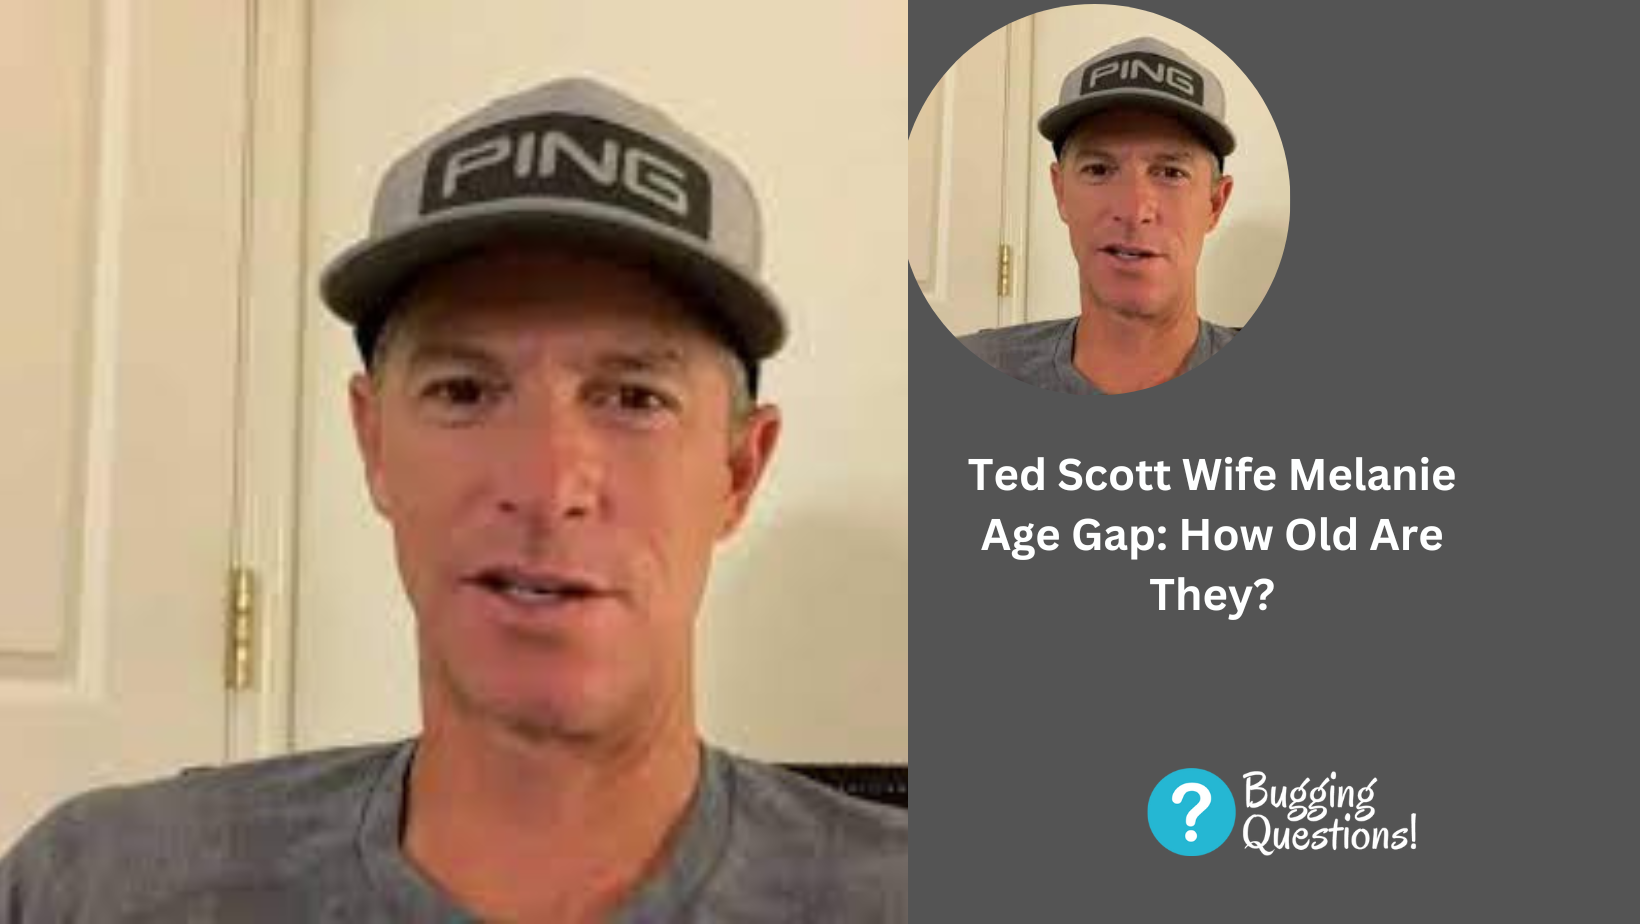 Ted Scott Wife Melanie Age Gap: How Old Are They? Know More About Their Kids As They Celebrate Their 20th Anniversary